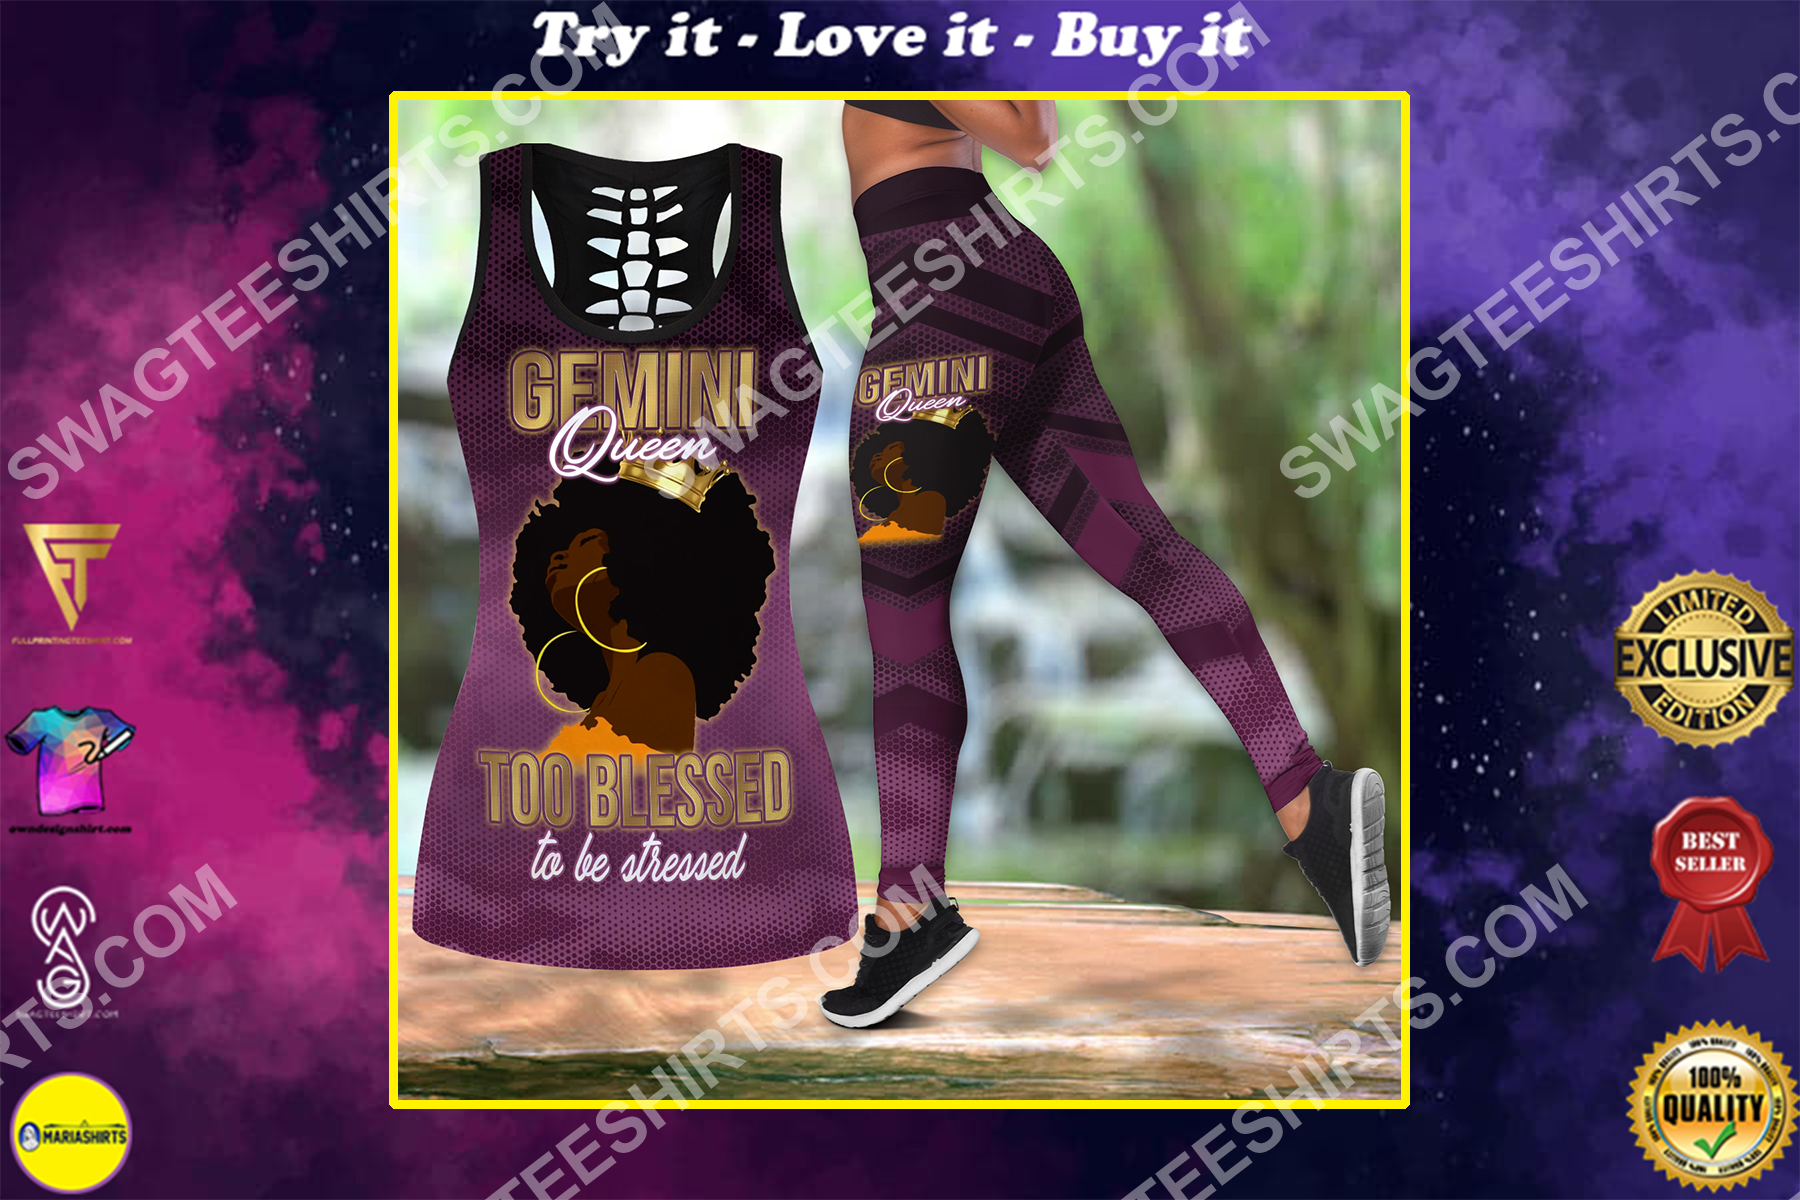 gemini queen too blessed to be stressed birthday gift set sports outfit